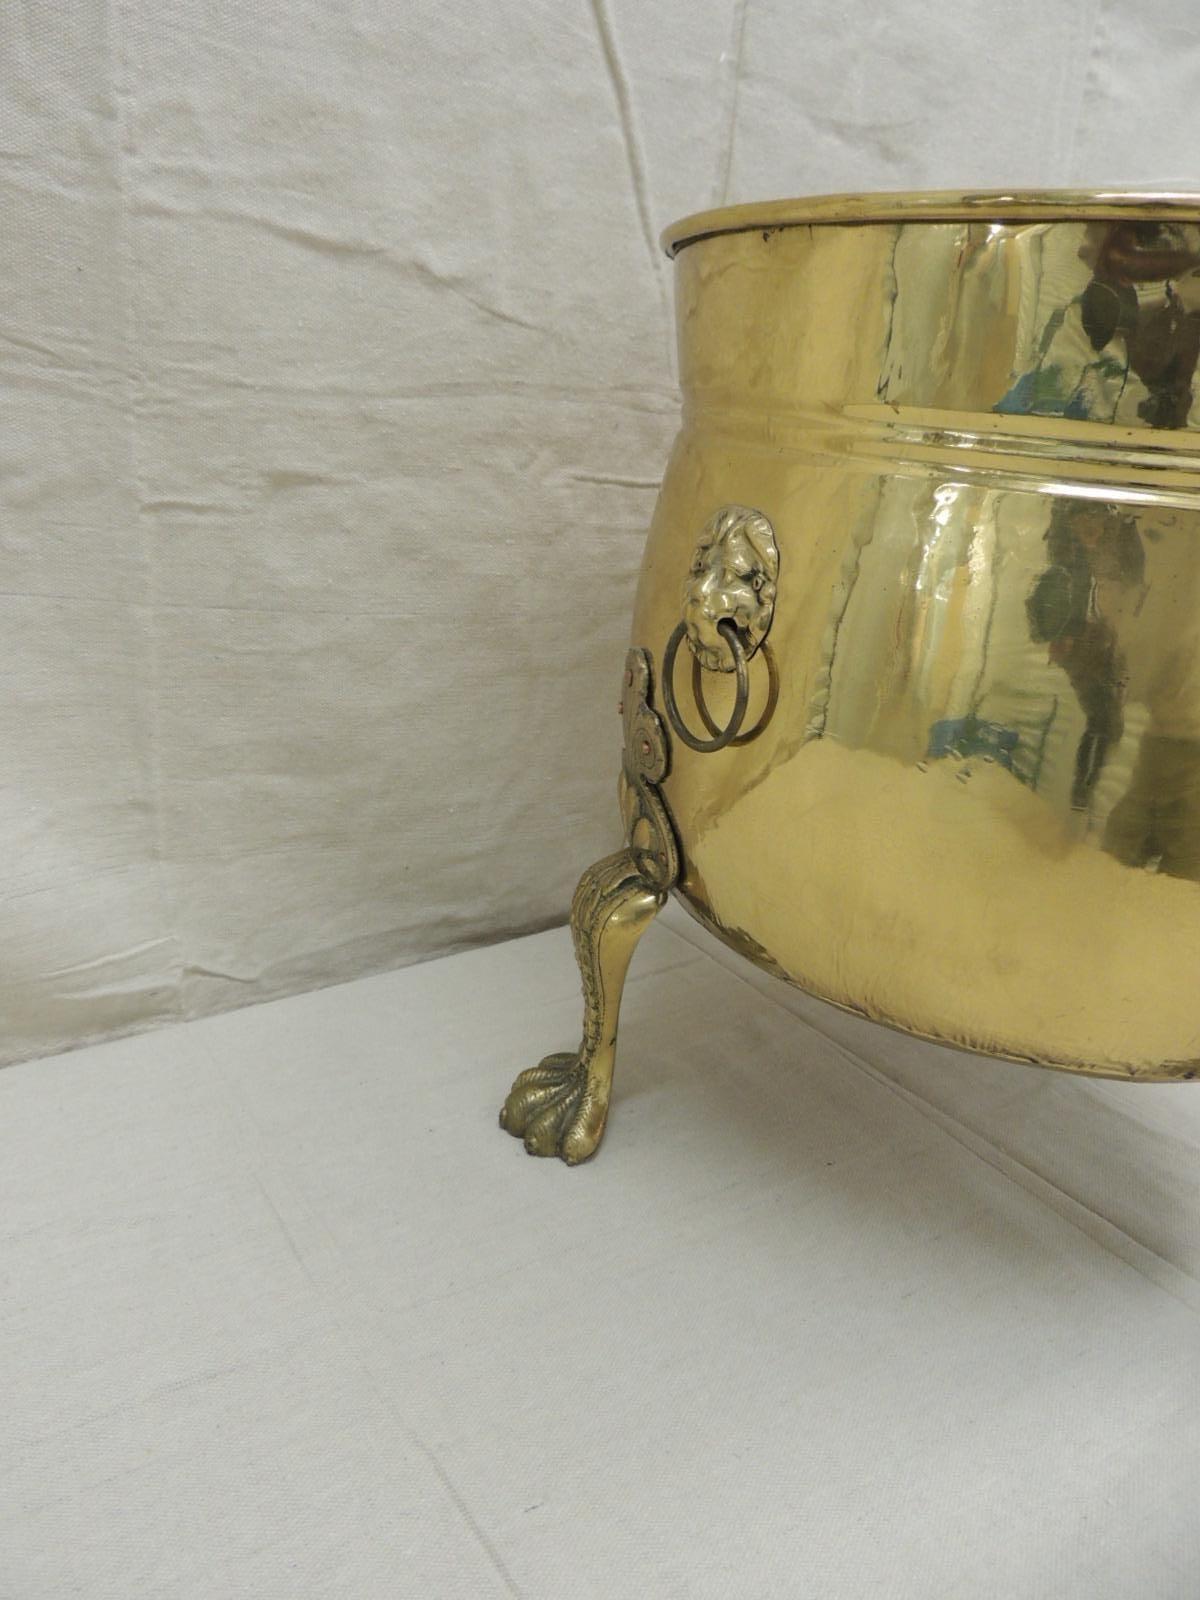 Antique polished brass plant/fireplace log holder CAULDRON
Round vessel with lion heads with handles attached and lions pouf feet (three)
Made in the United Kingdom and stamped craftsmen hand-hammered in England. The flower pattern around the base